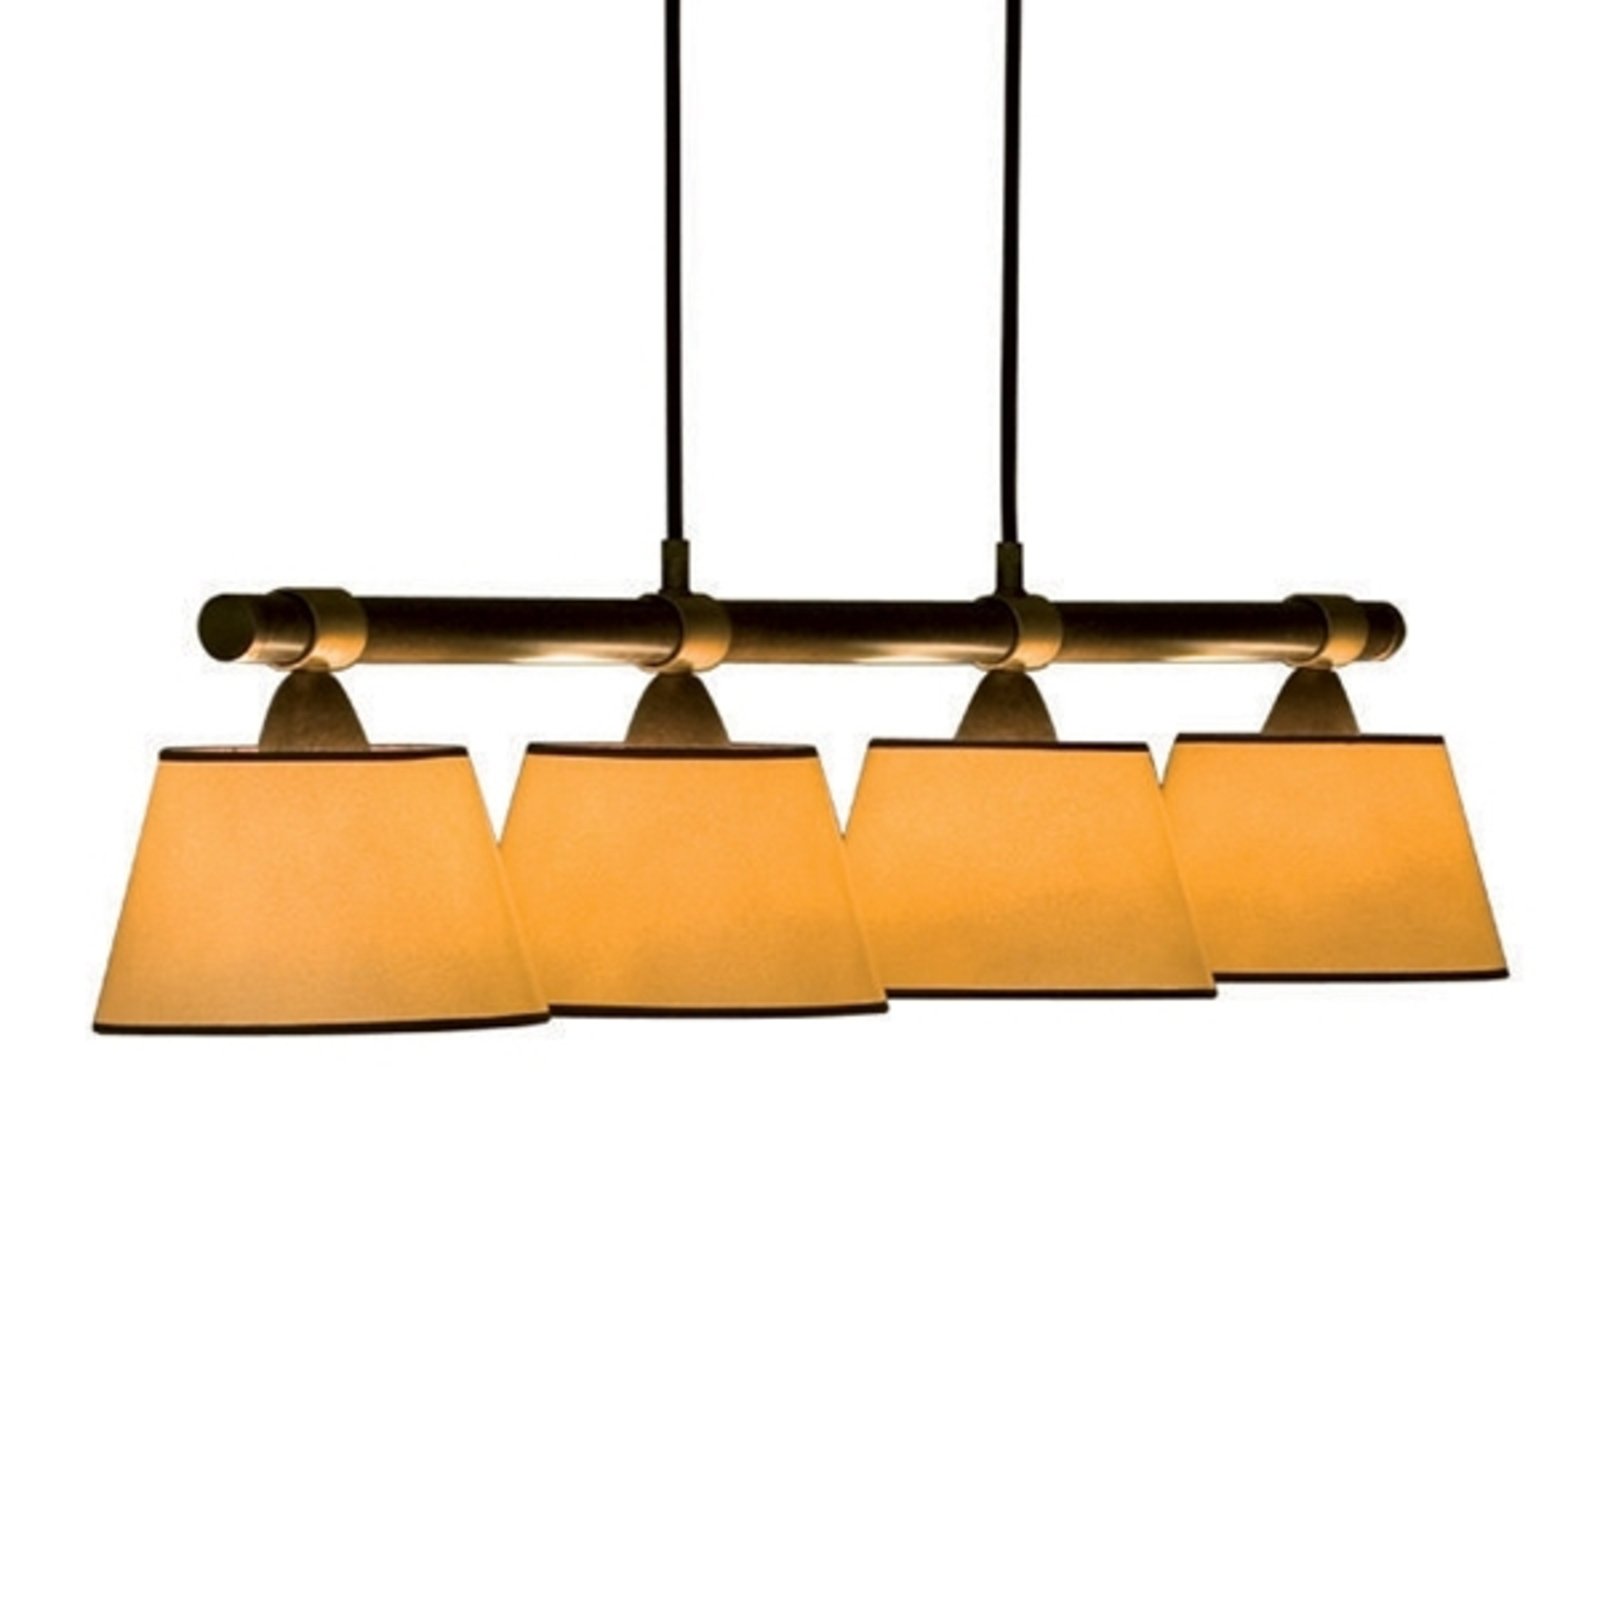 Menzel Living Table - Candeeiro suspenso 4 luzes creme